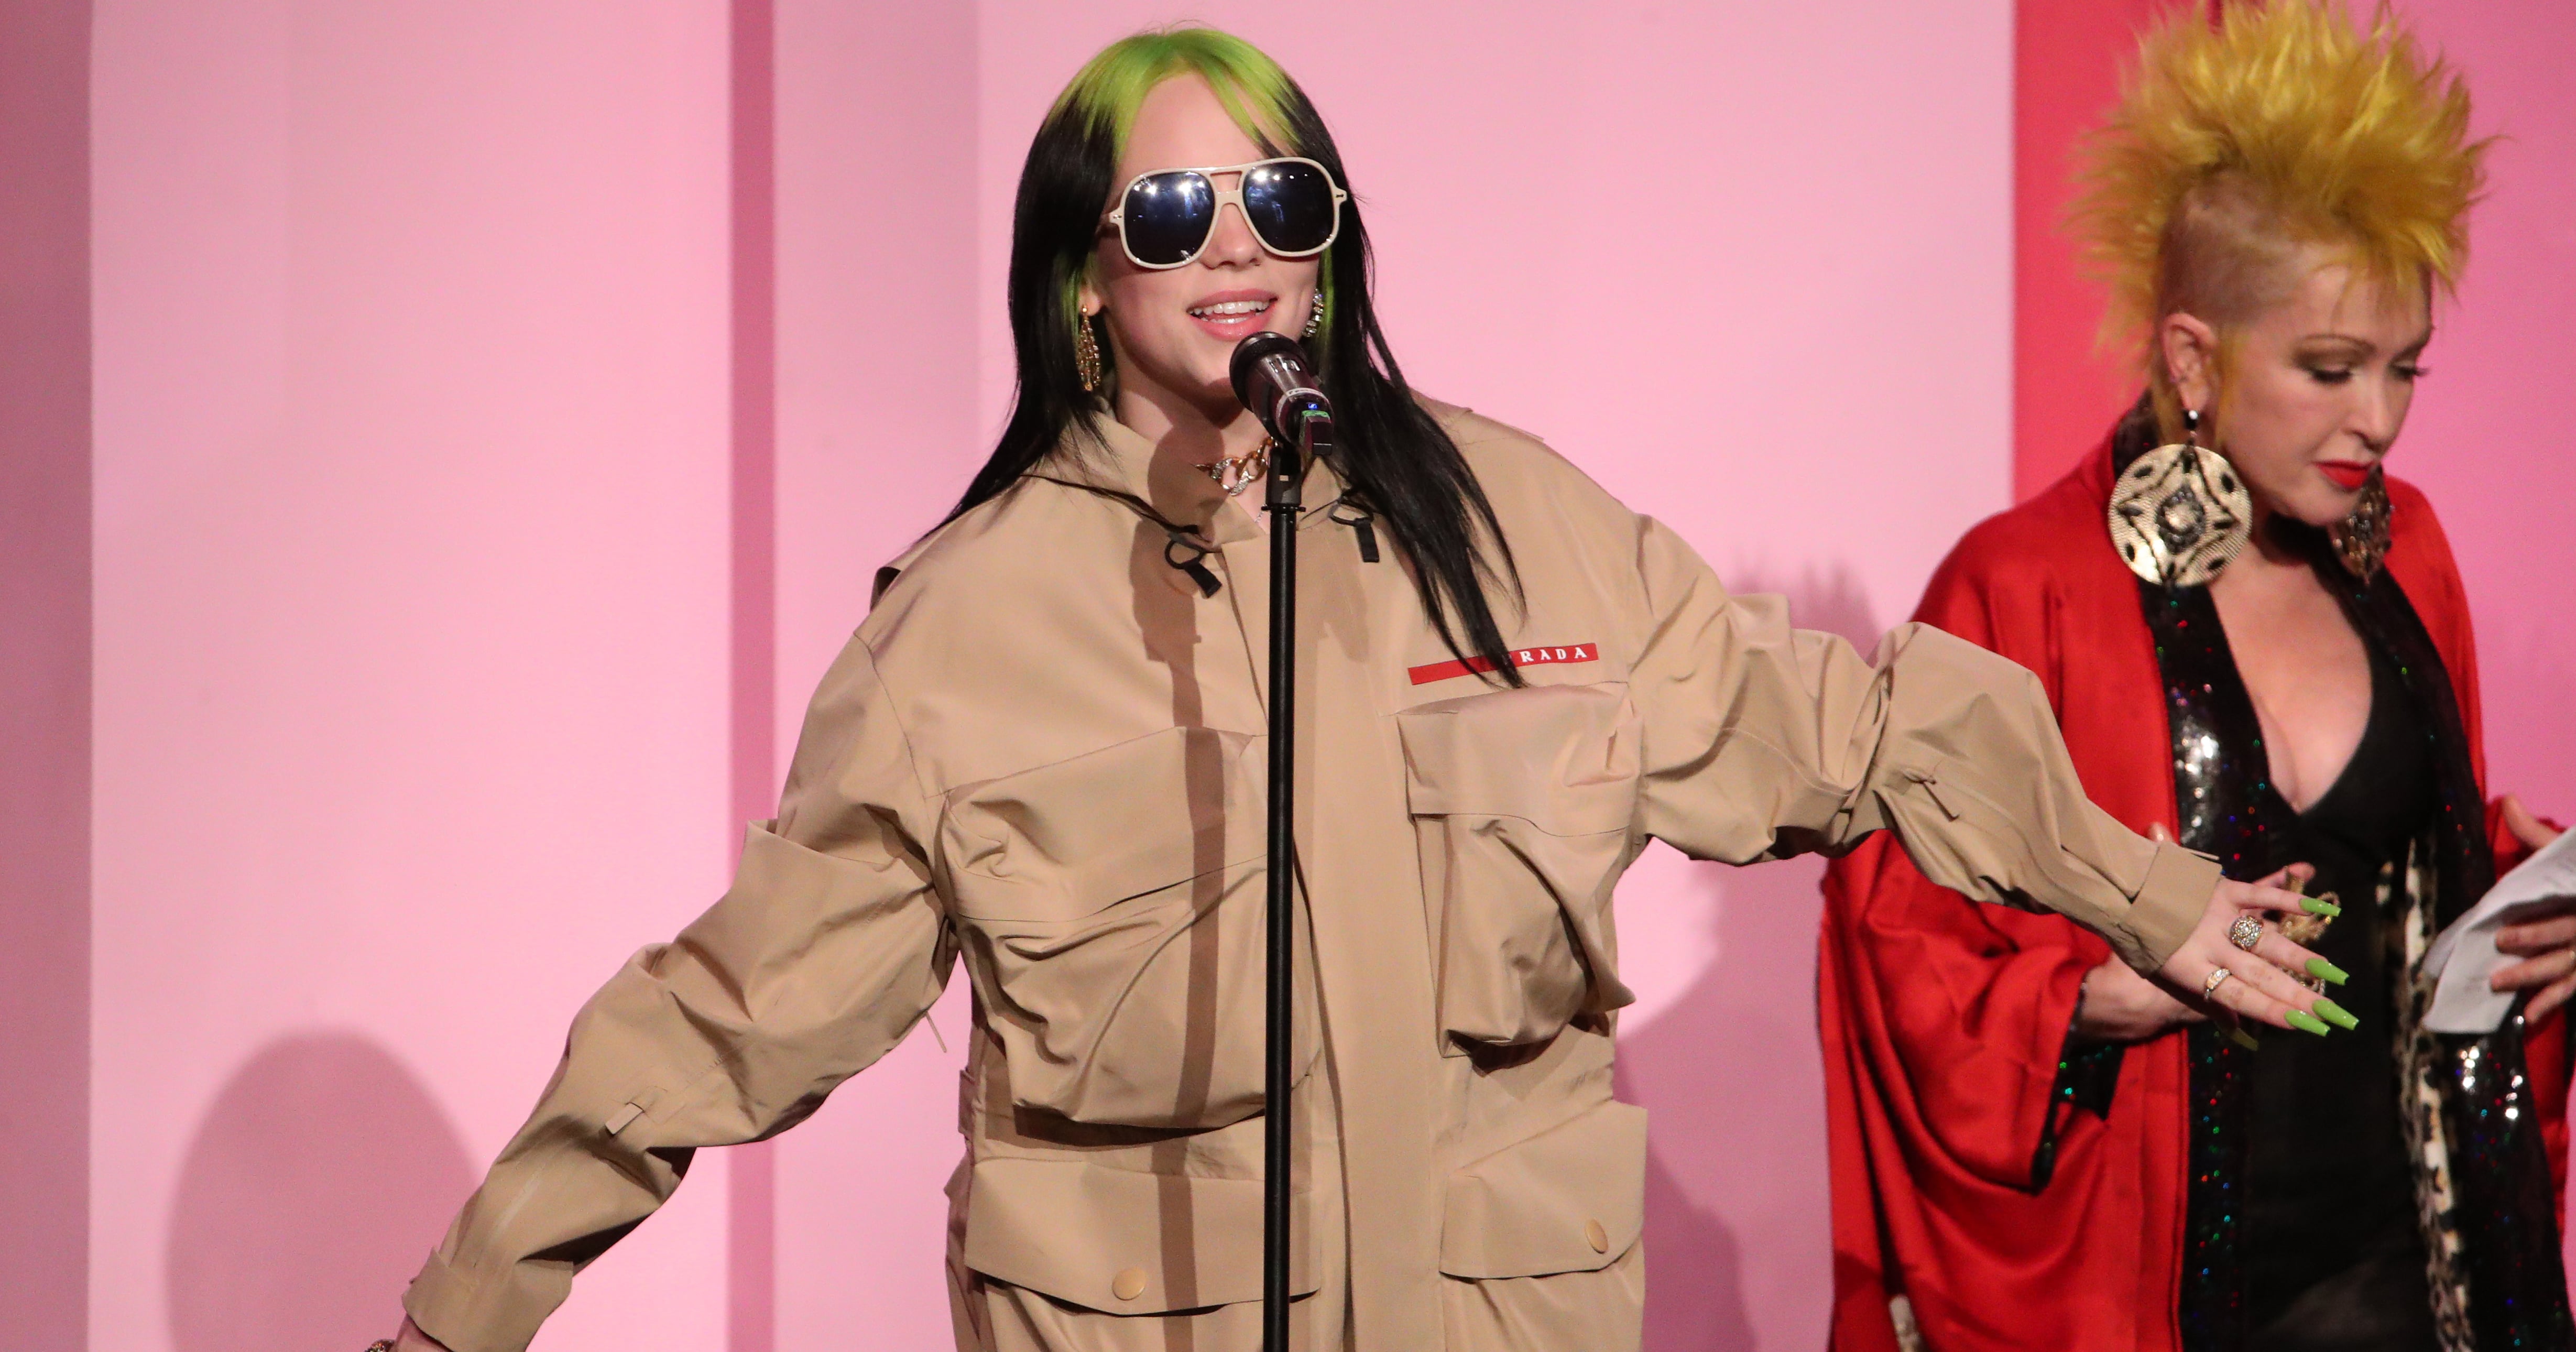 Billie Eilish Tears Up During Power of Women Event: 'I Feel Very Proud' –  Billboard